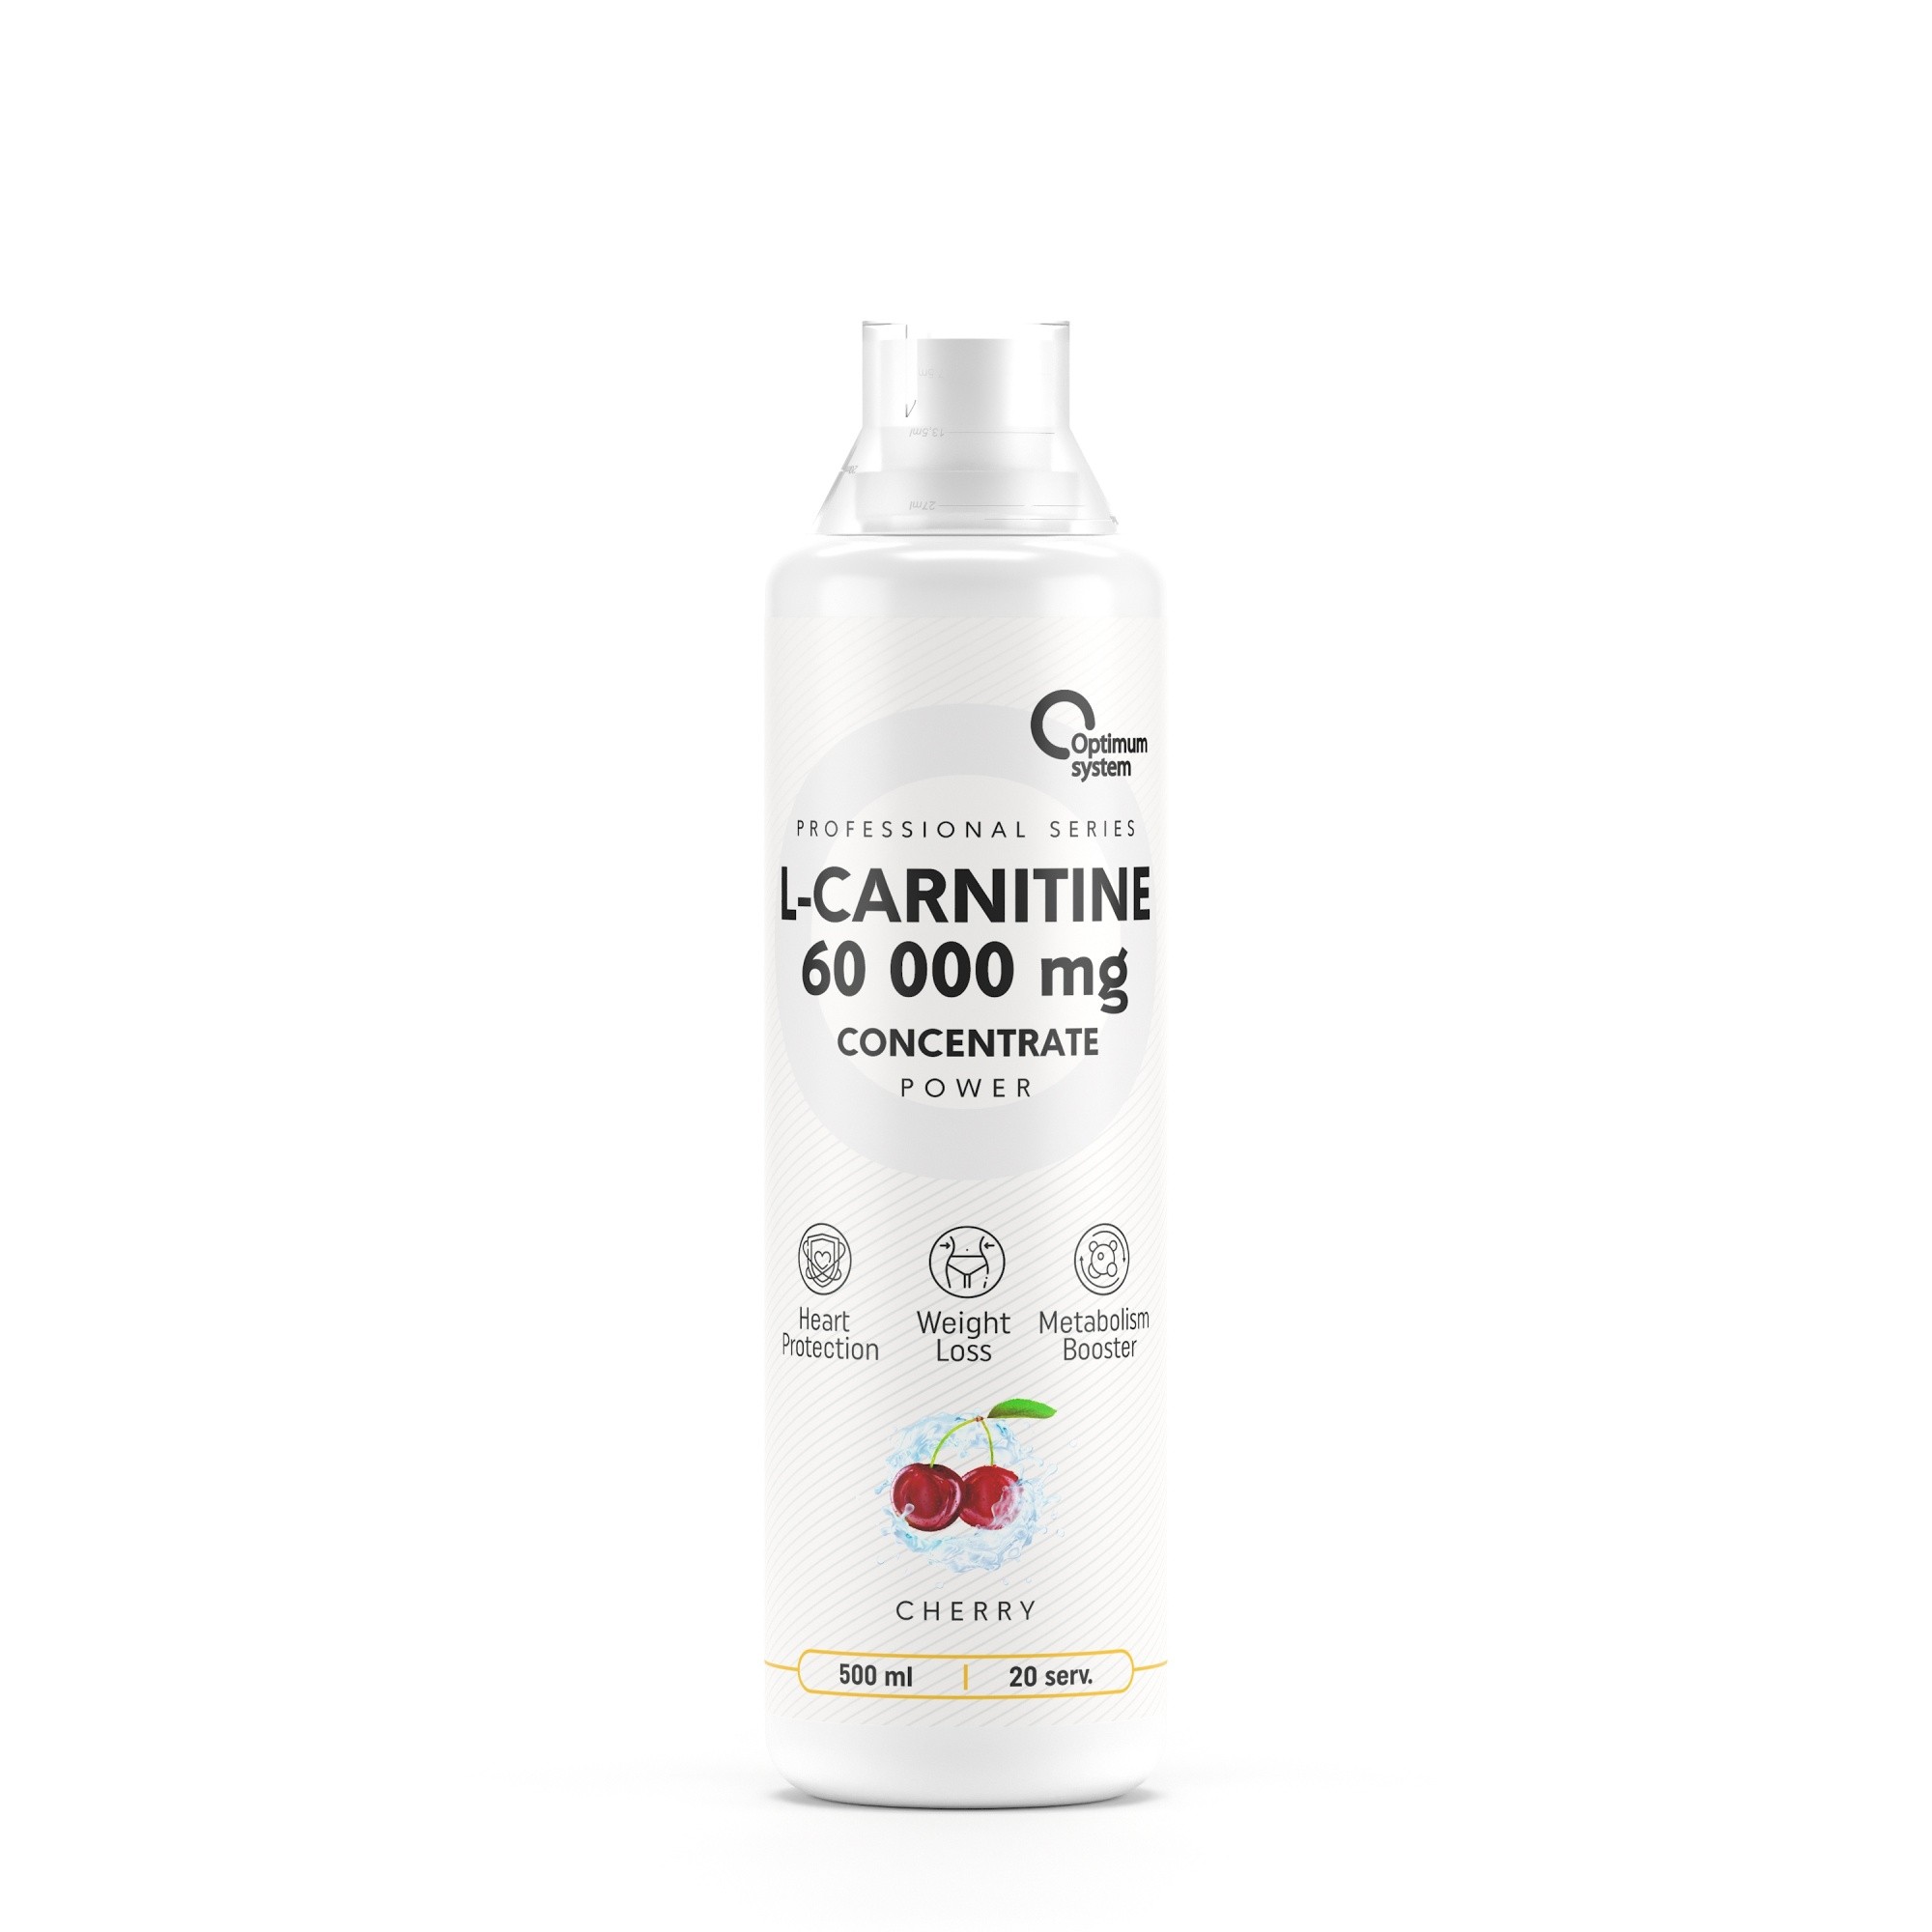 L-Carnitine Concentrate 60000 POWER